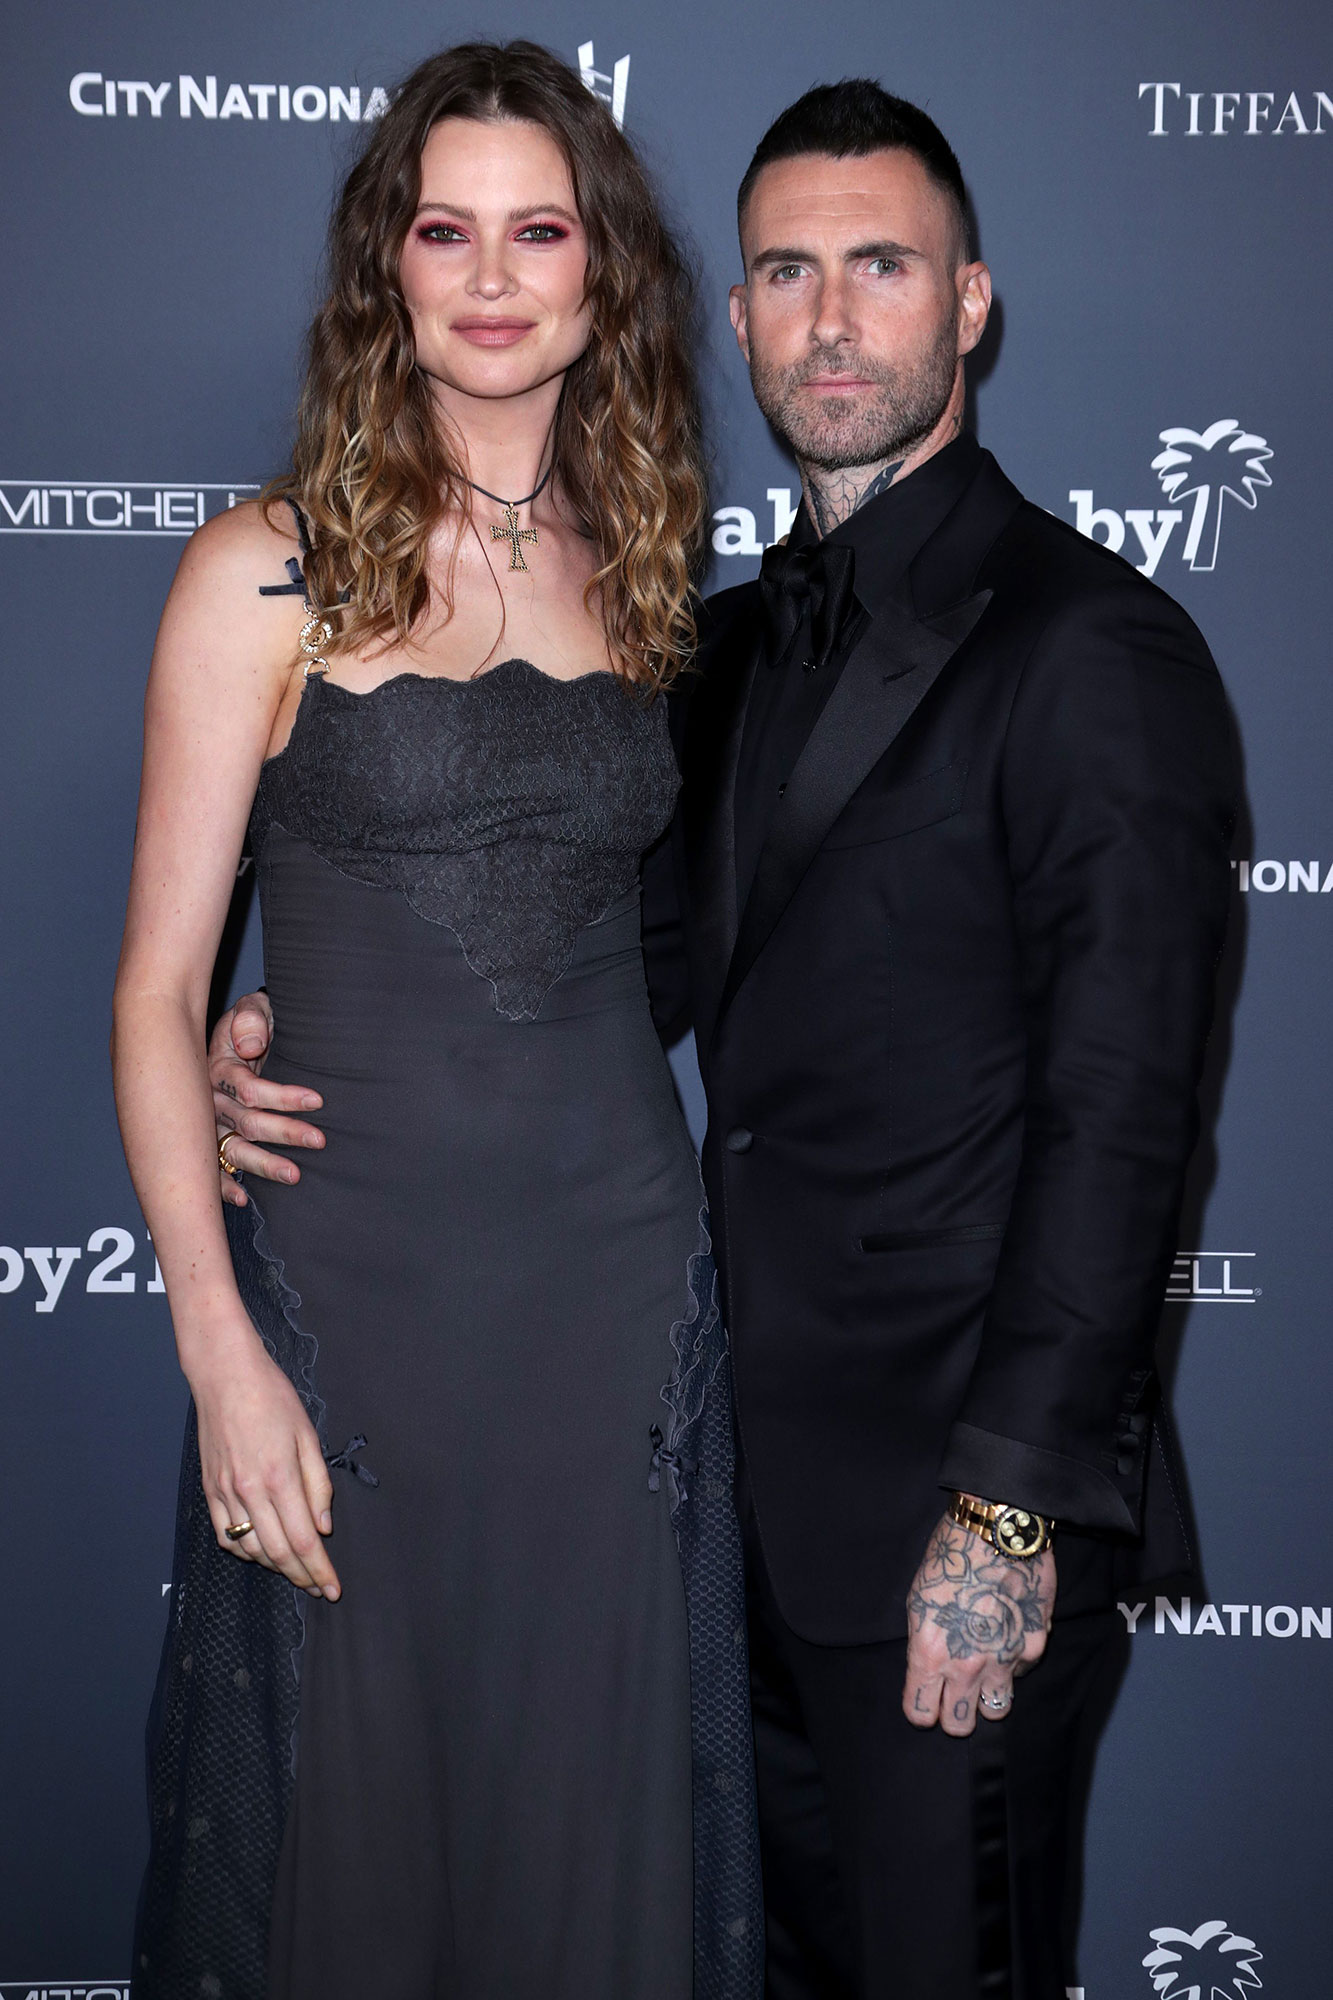 Adam Levine's Quotes About Love, Behati Before Cheating Claims | Us Weekly